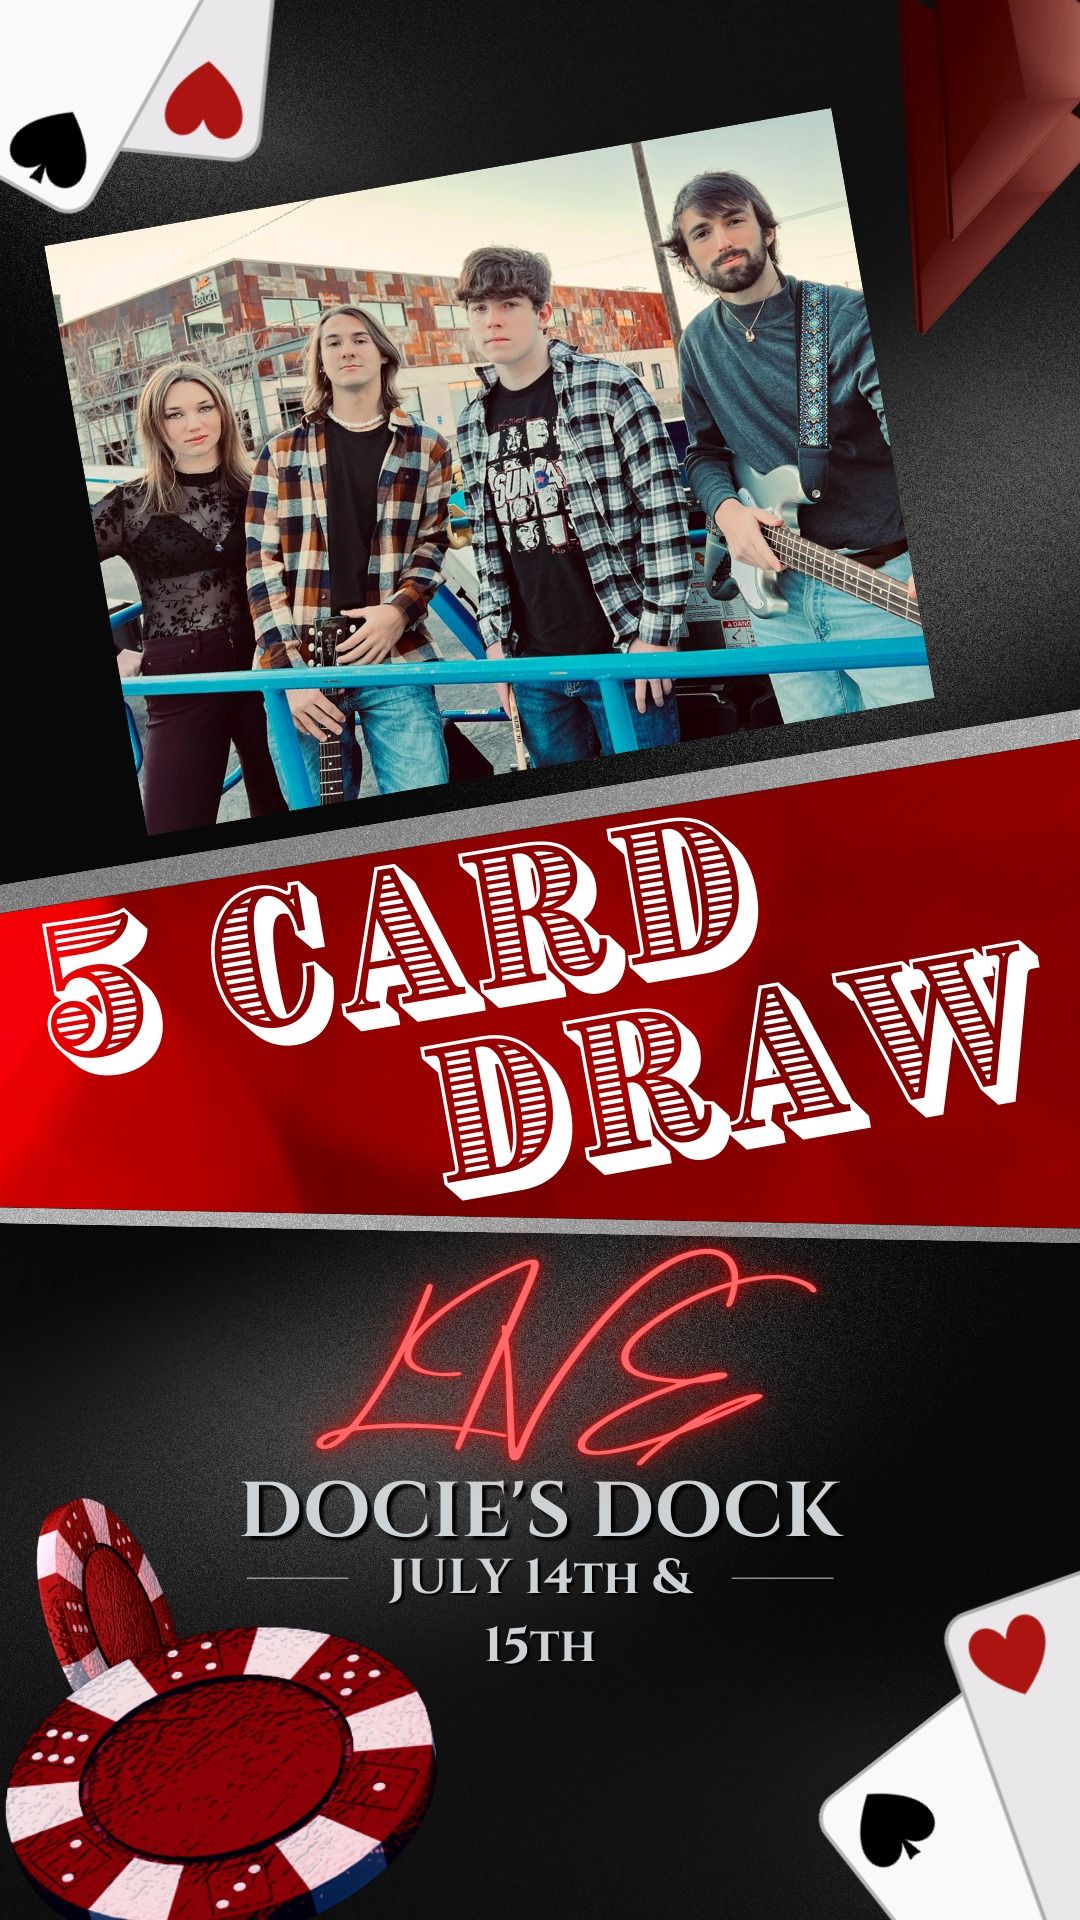 Five Card Draw Live at Docie's Dock Two Nights Friday July 19th & Saturday July 20th